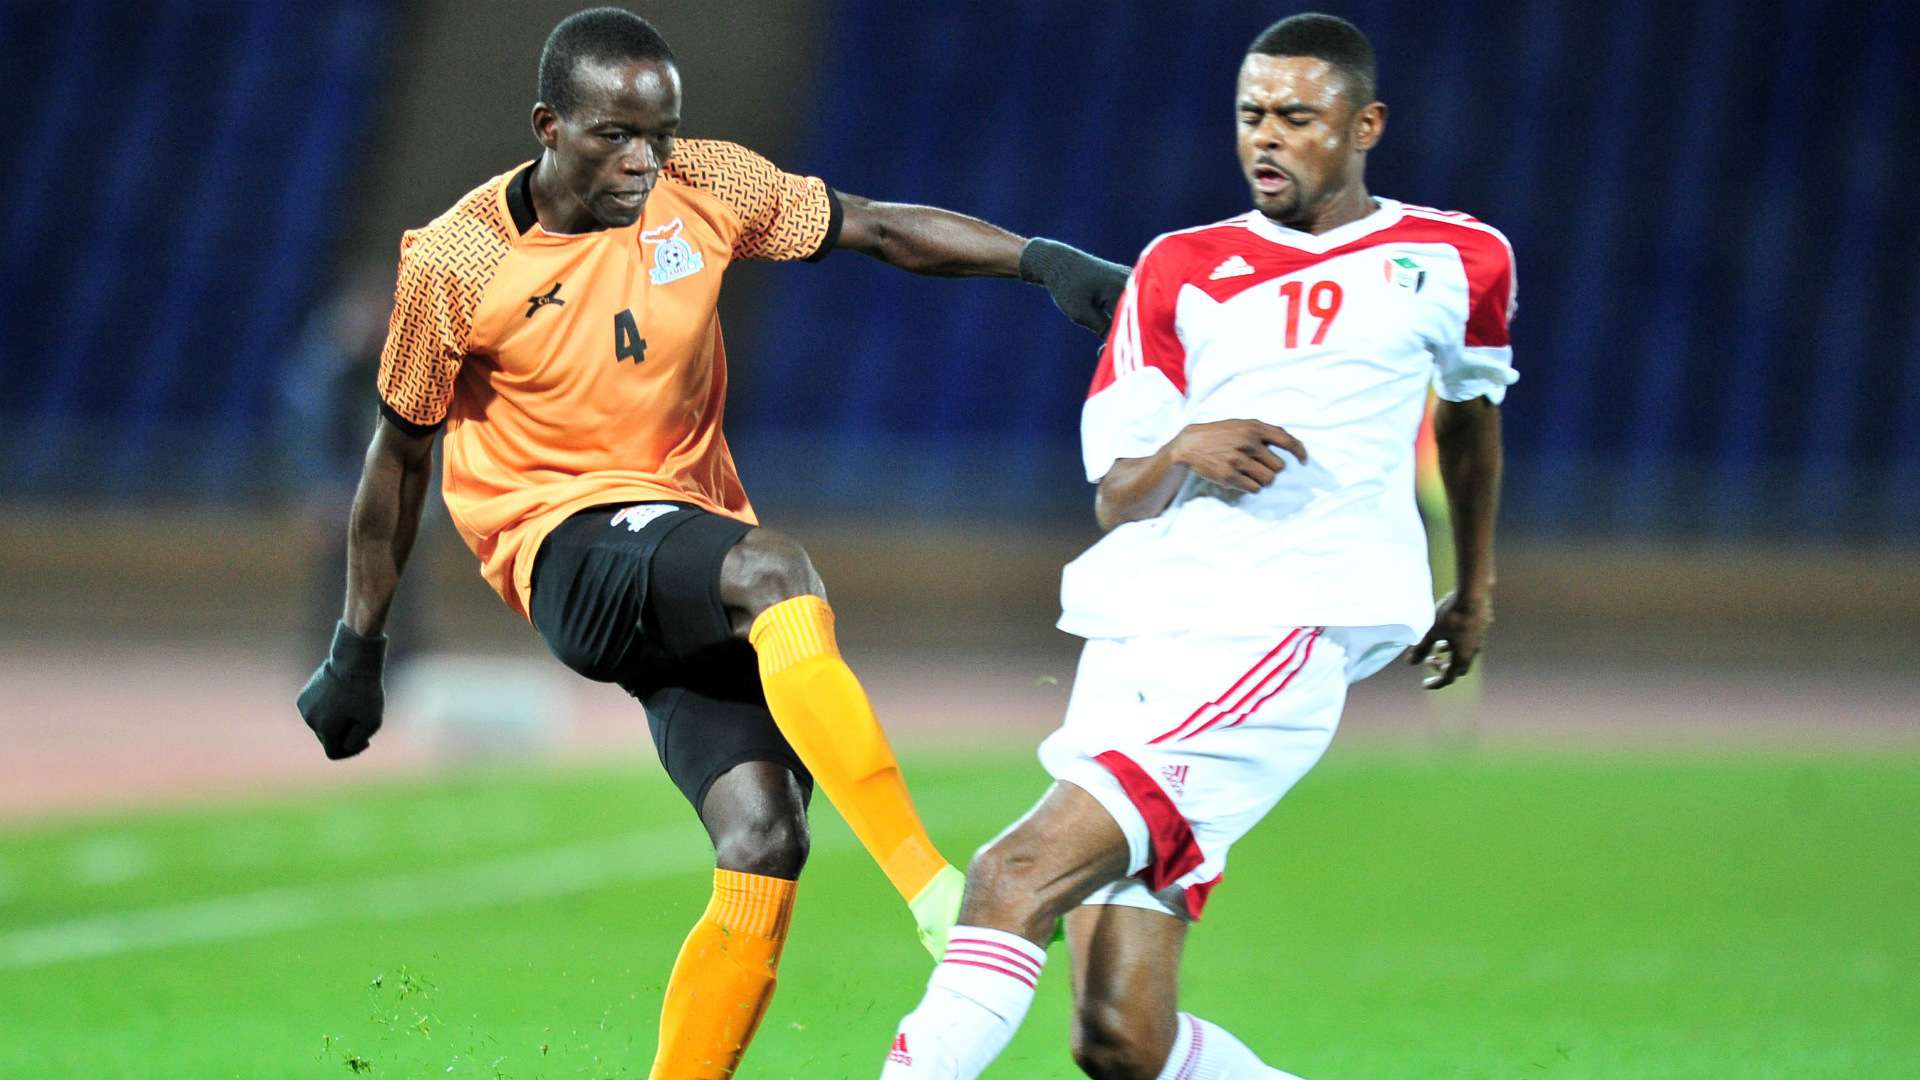 Adrian Chama of Zambia challenged by Mohamed Ahmed Bashir Bisha of Sudan.